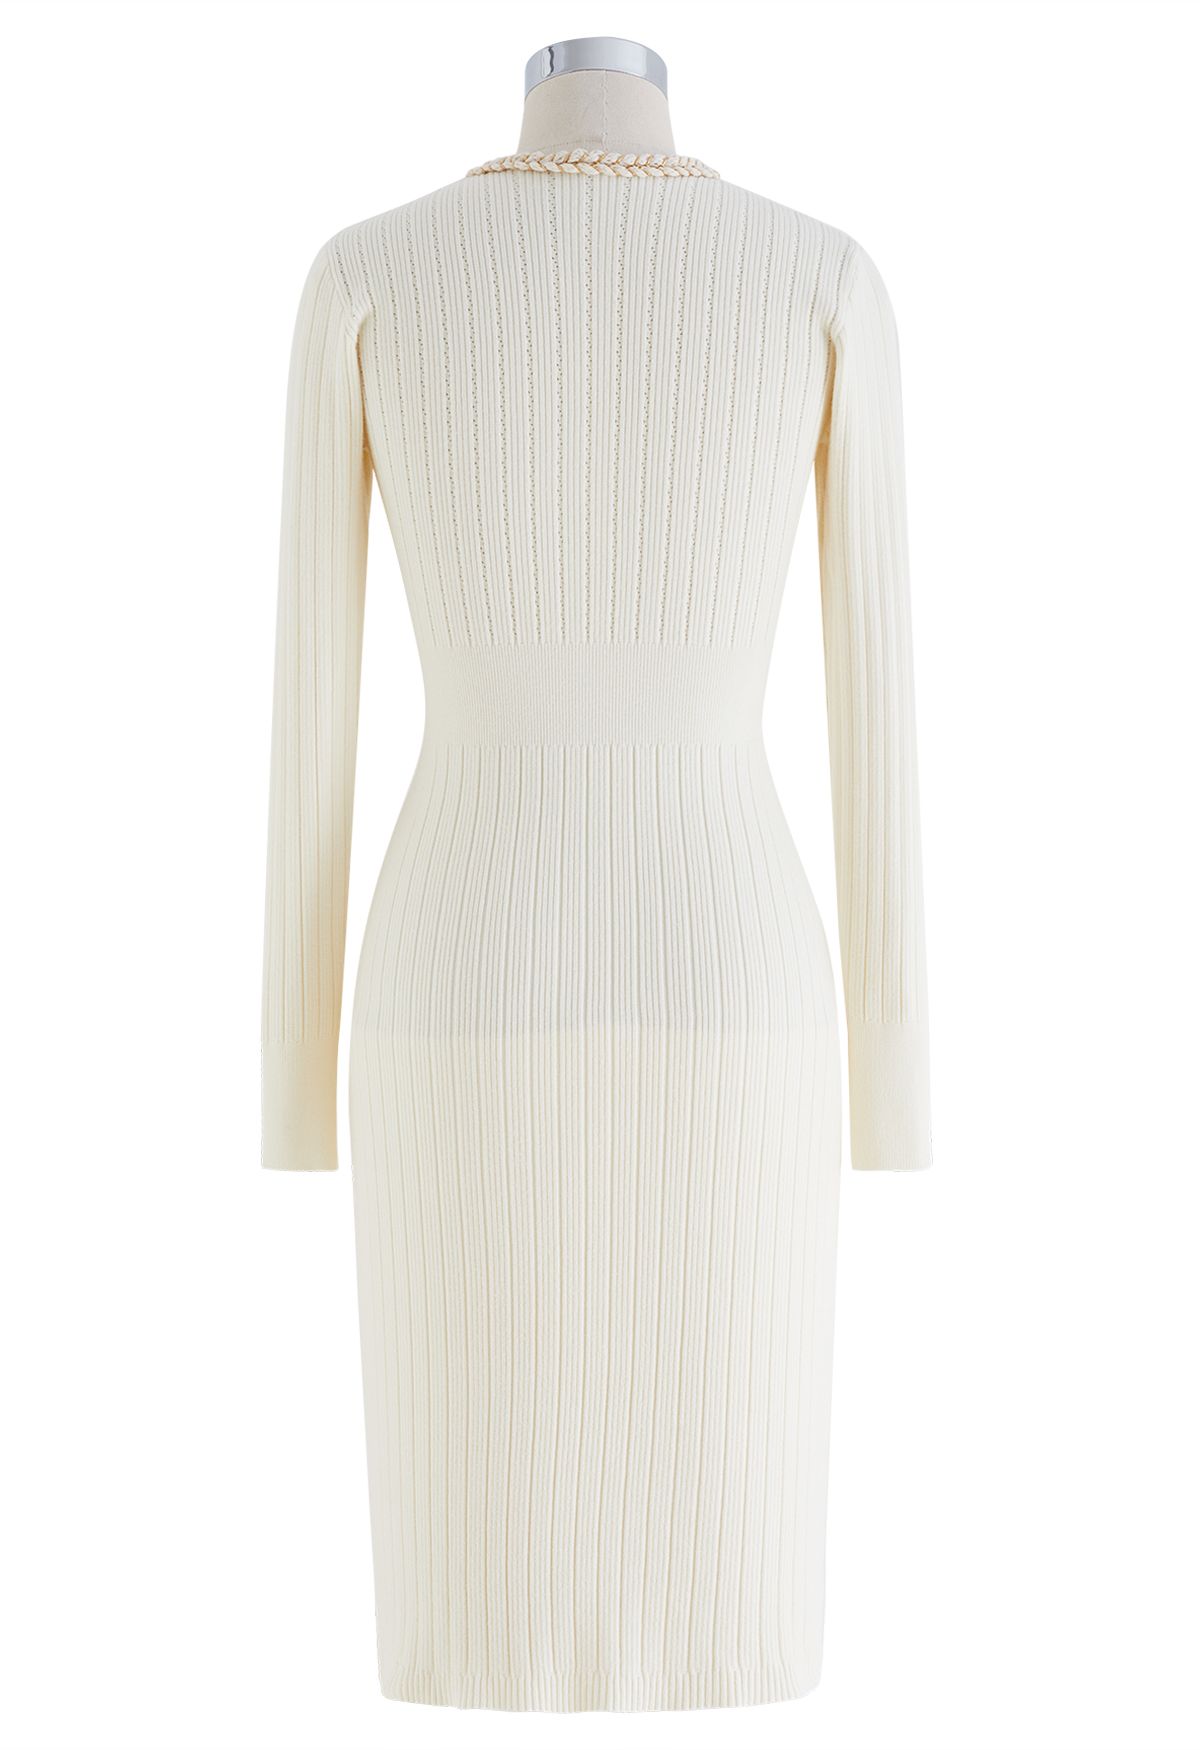 Braided Edge Golden Button Bodycon Knit Dress in Ivory